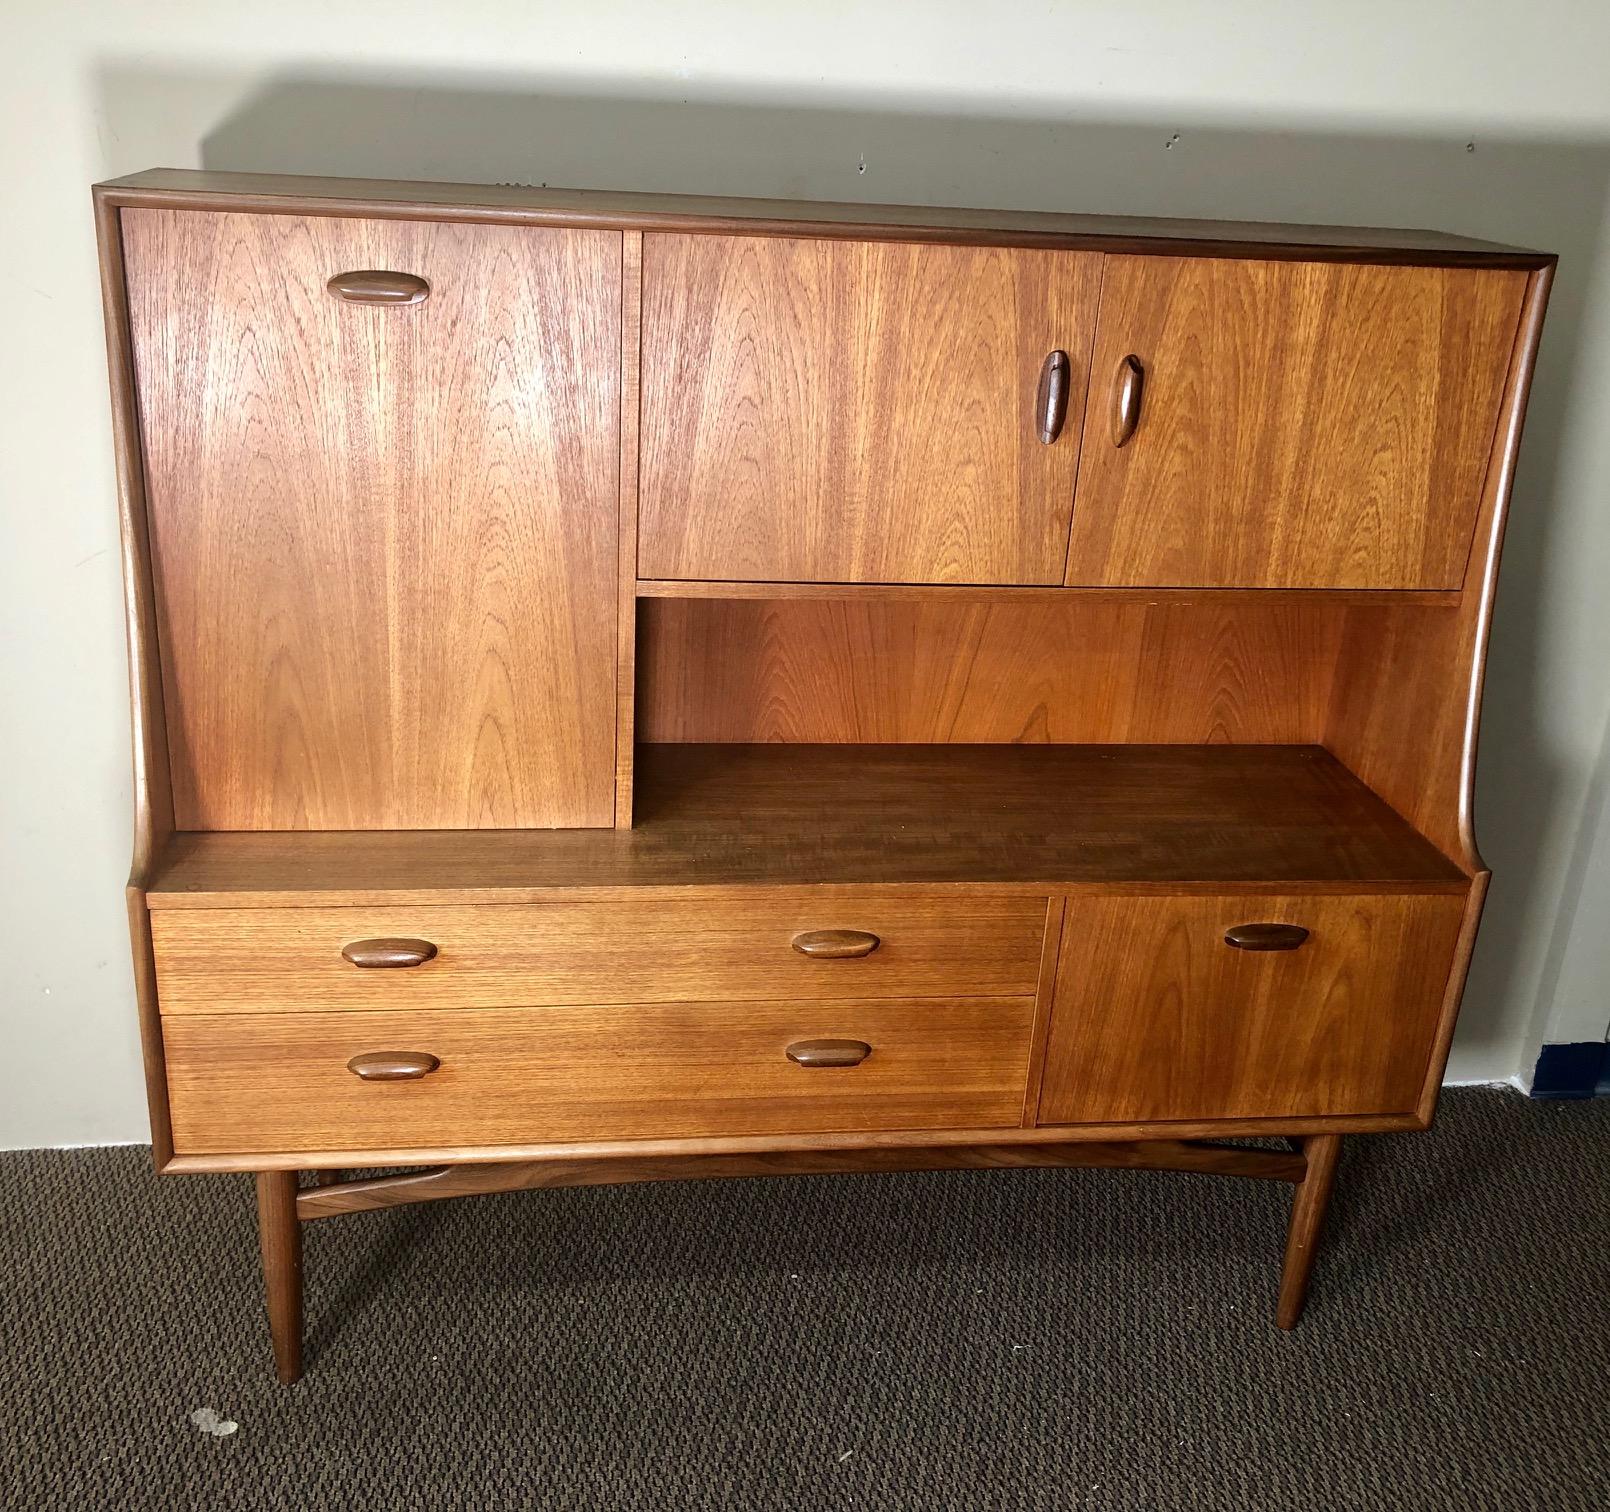 Mid-Century Modern versatile teak highboard by G Plan. Featuring an upper large drop down cabinet that can be used as a small desk and lower drop down cabinet or bar.

Very good vintage condition. There are some marks on the top as shown in